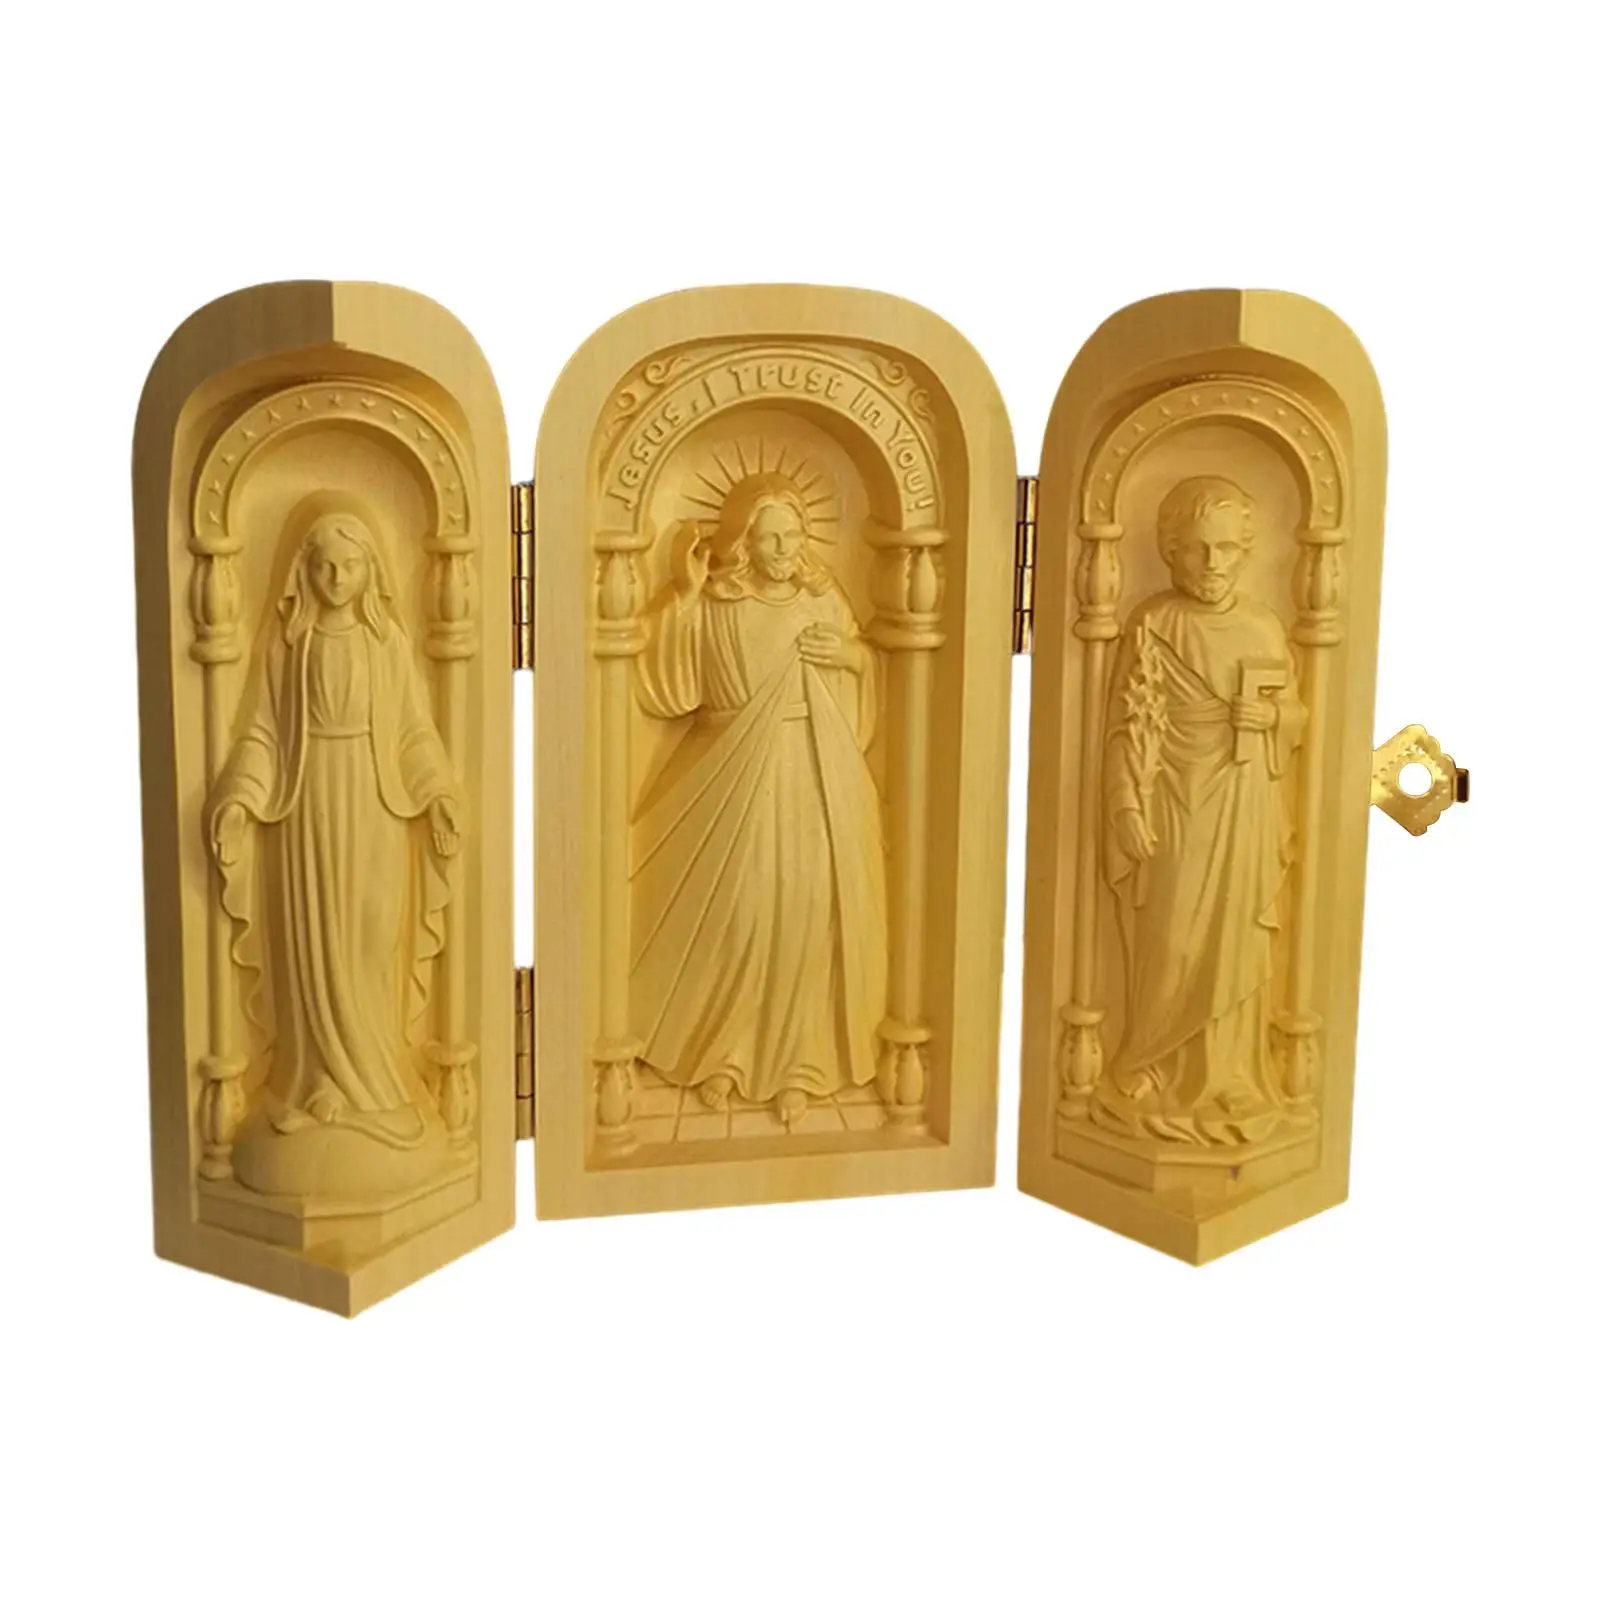 Wood Carving Ornaments Catholic Religious Decor Cardinal Handicraft Ornament Statues for Office Bedroom Living Room Gift